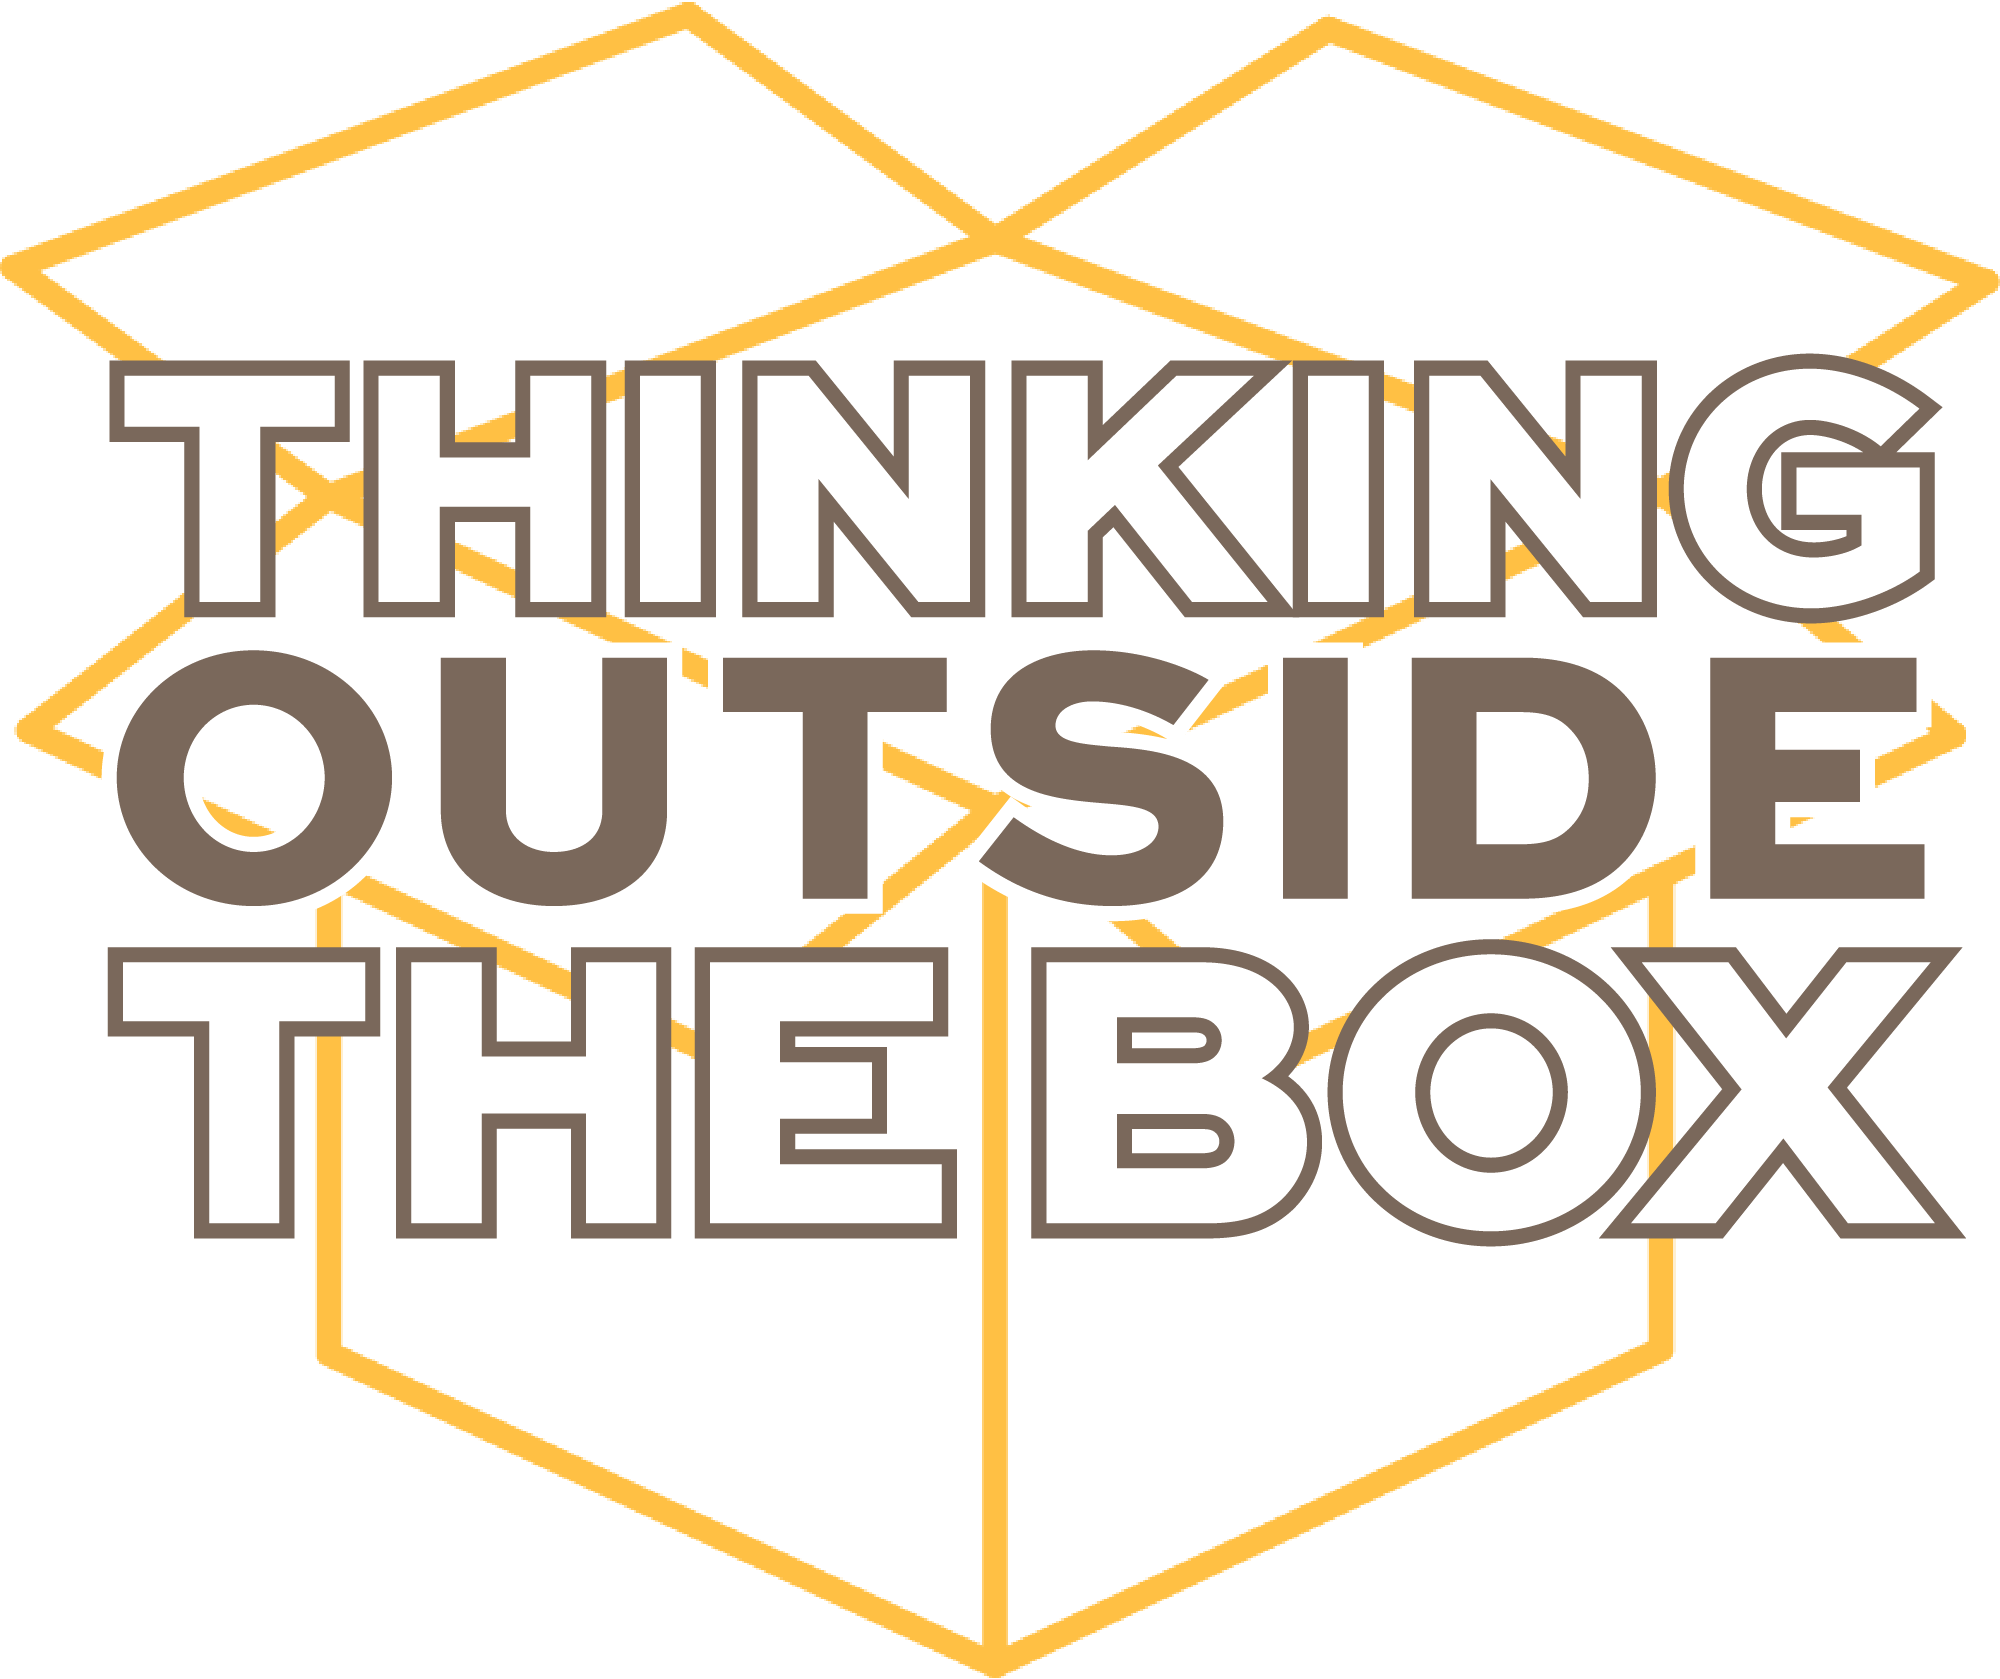 Thinking Outside the Box title